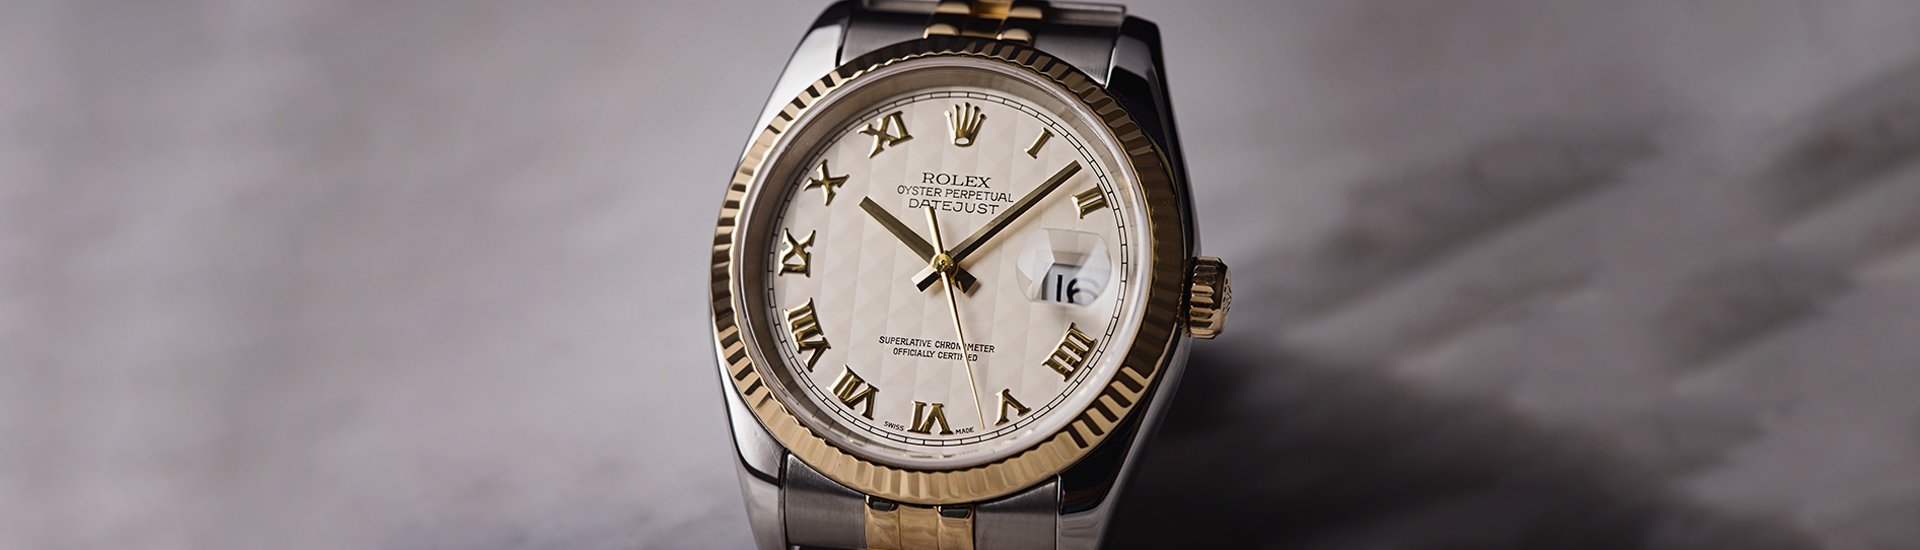 rolex watches for women shift to larger dials